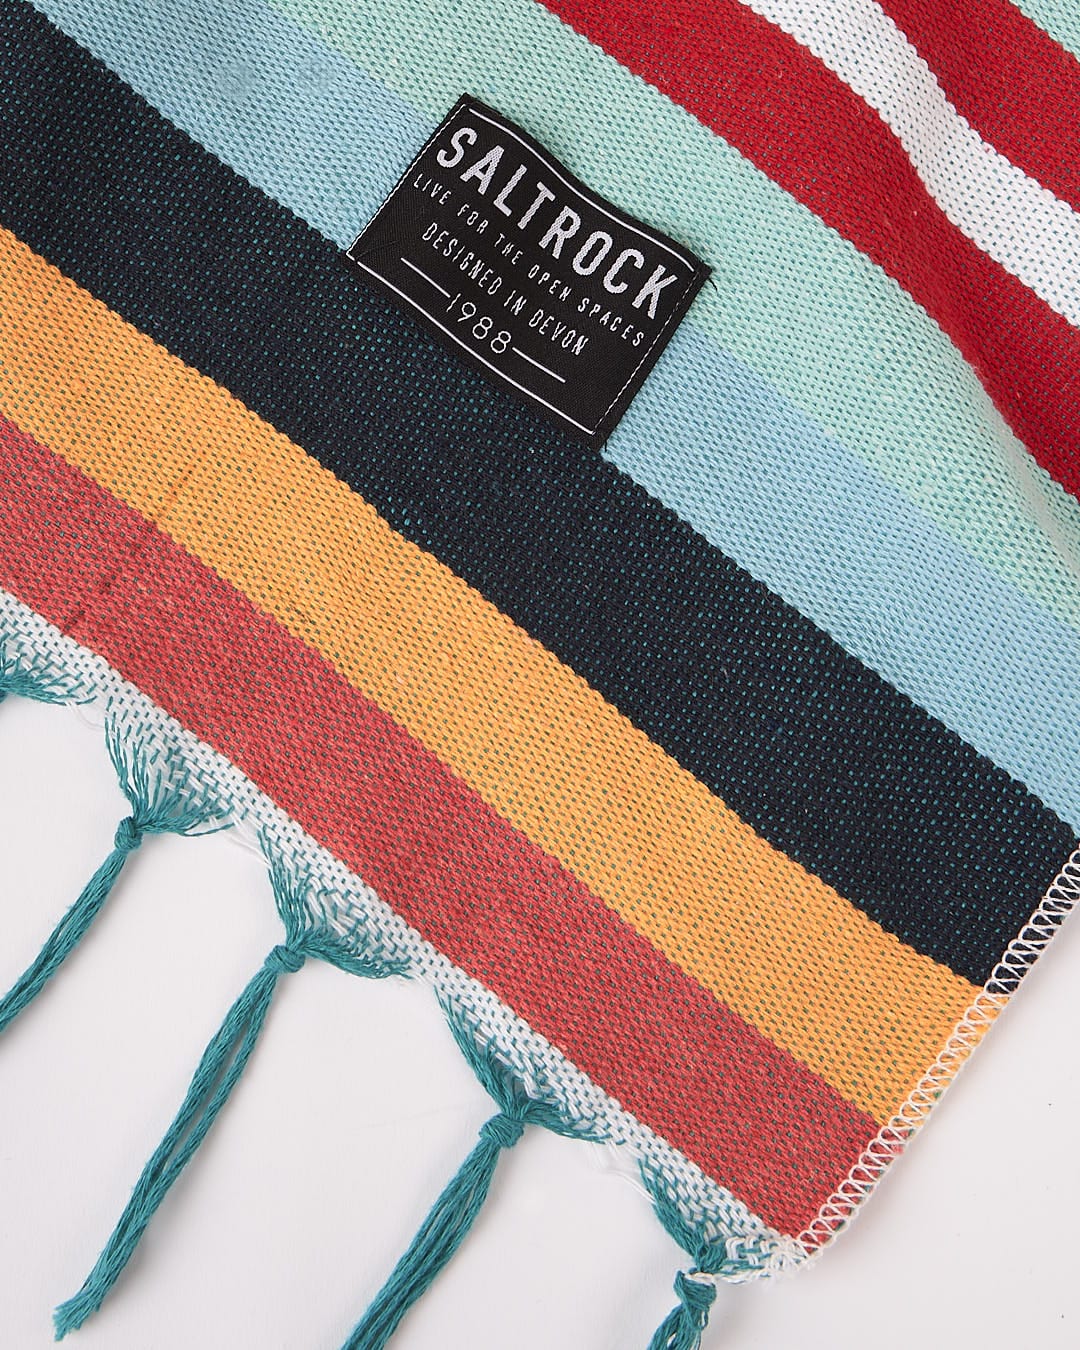 A colorful striped towel made from recycled cotton fiber with a woven label that says Saltrock.